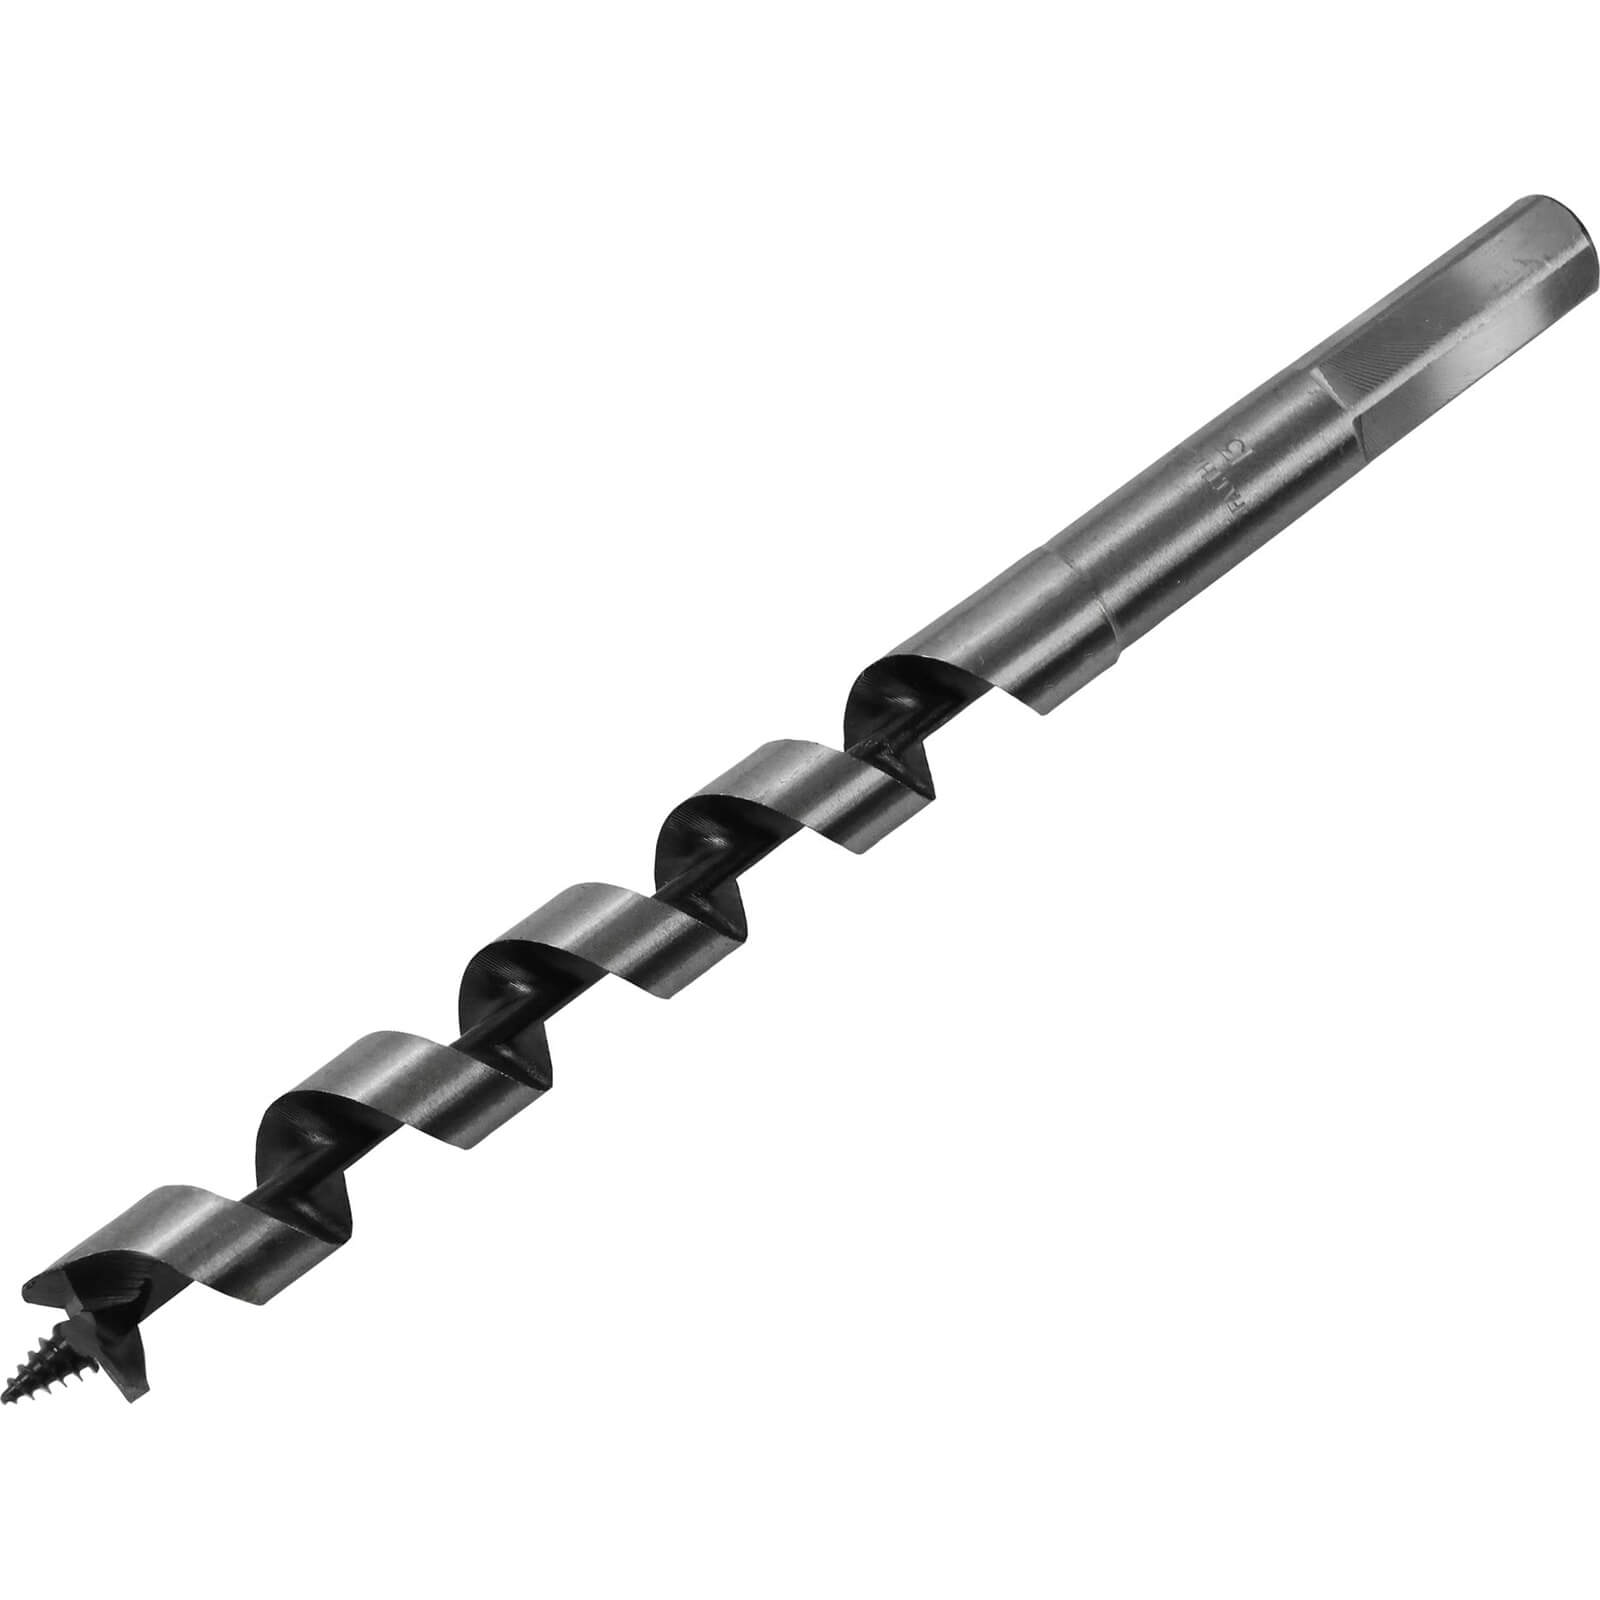 Image of Faithfull Combination Auger Drill Bit 16mm 200mm